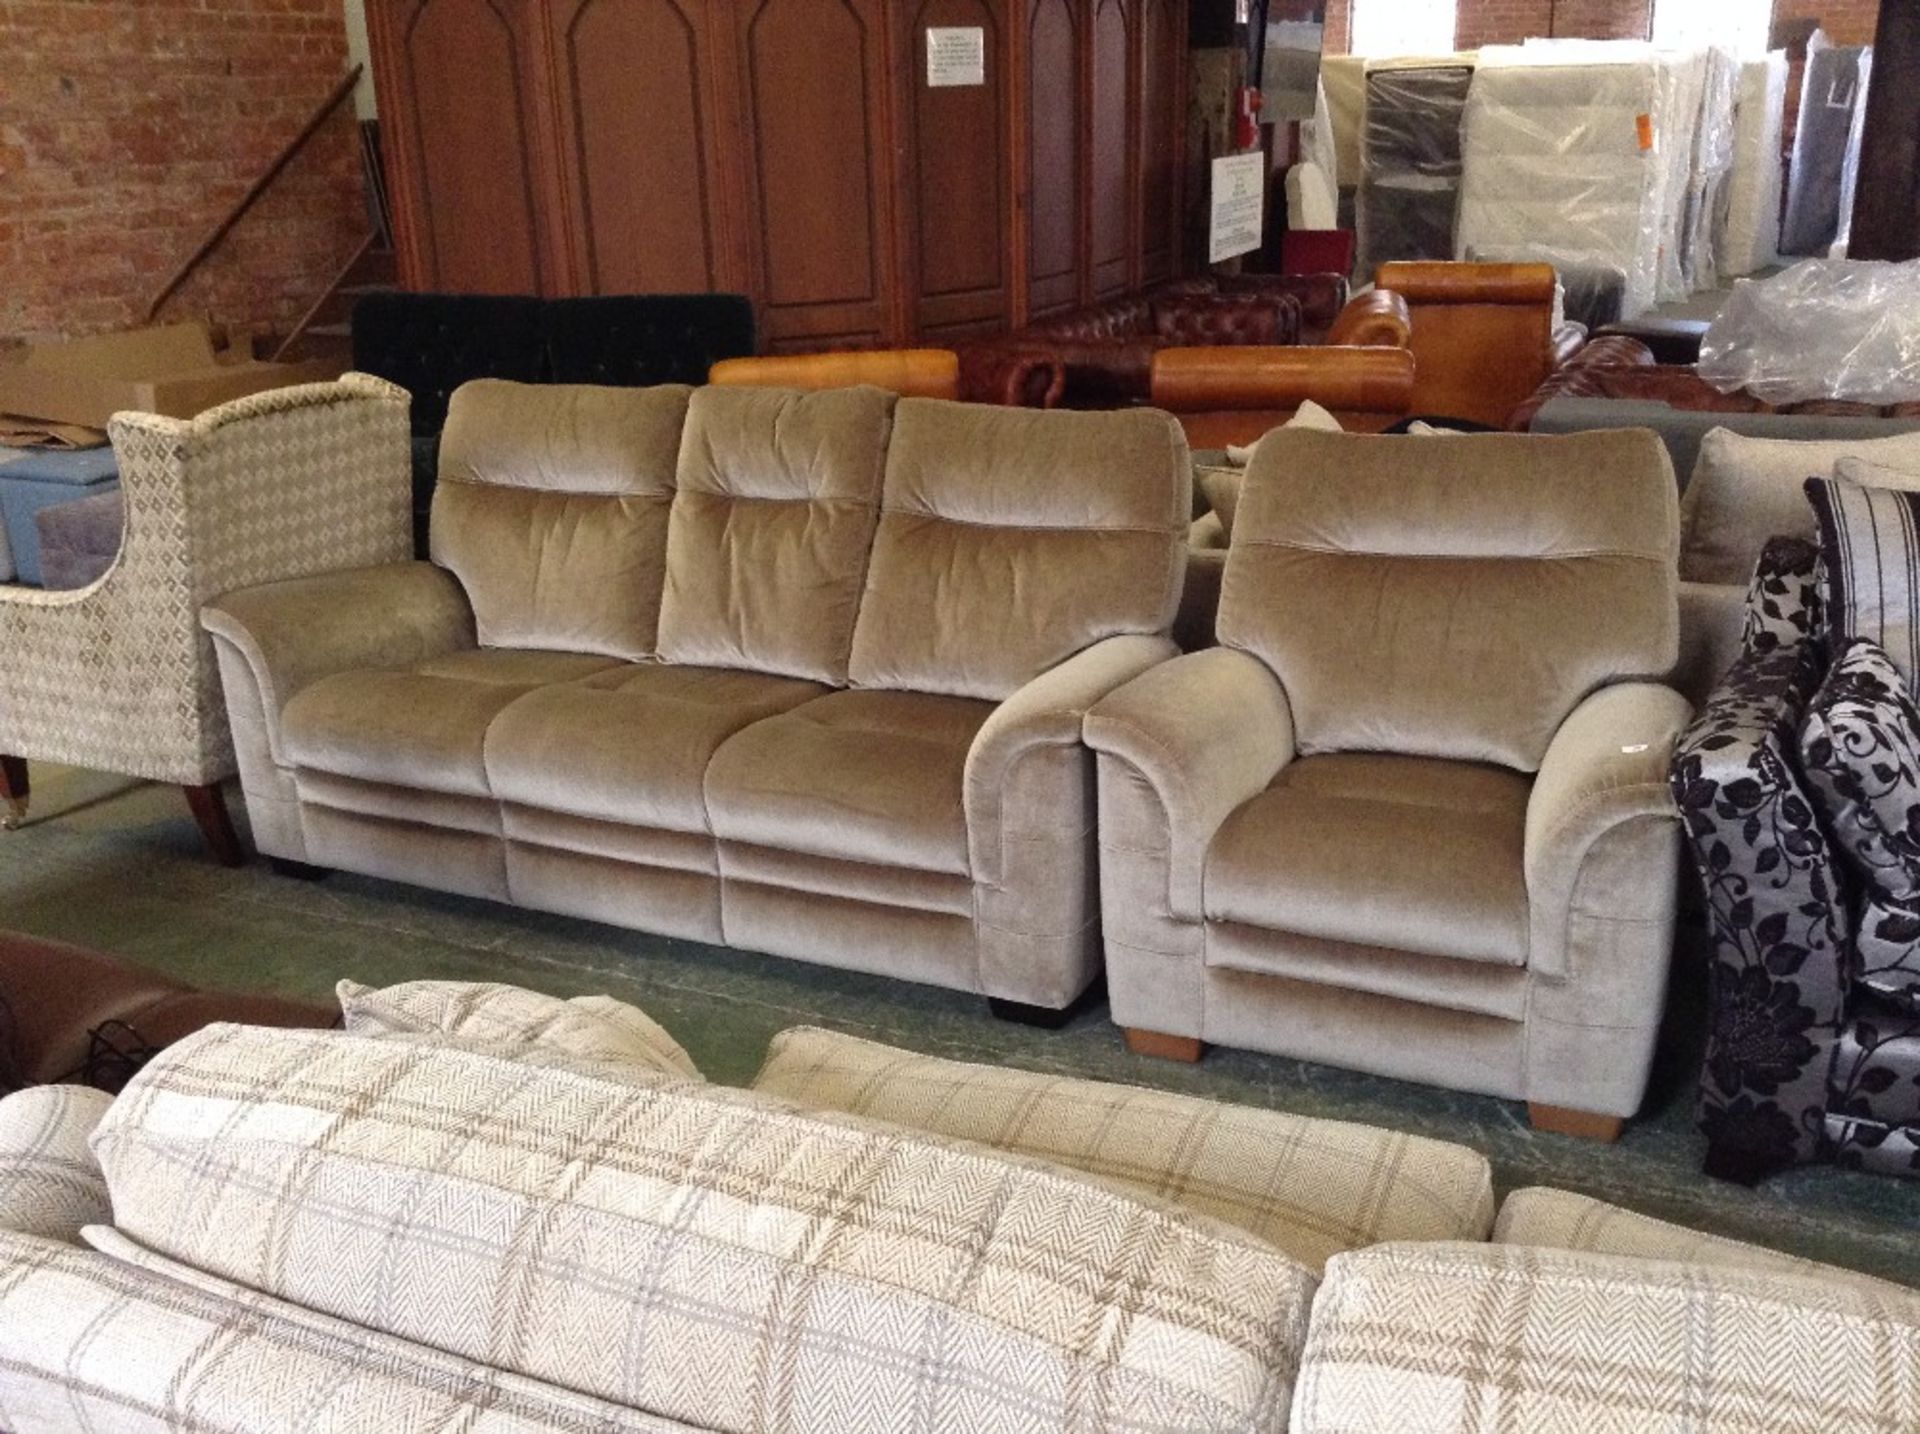 BEIGE 3 SEATER SOFA AND CHAIR (TR000693 WO0150191)